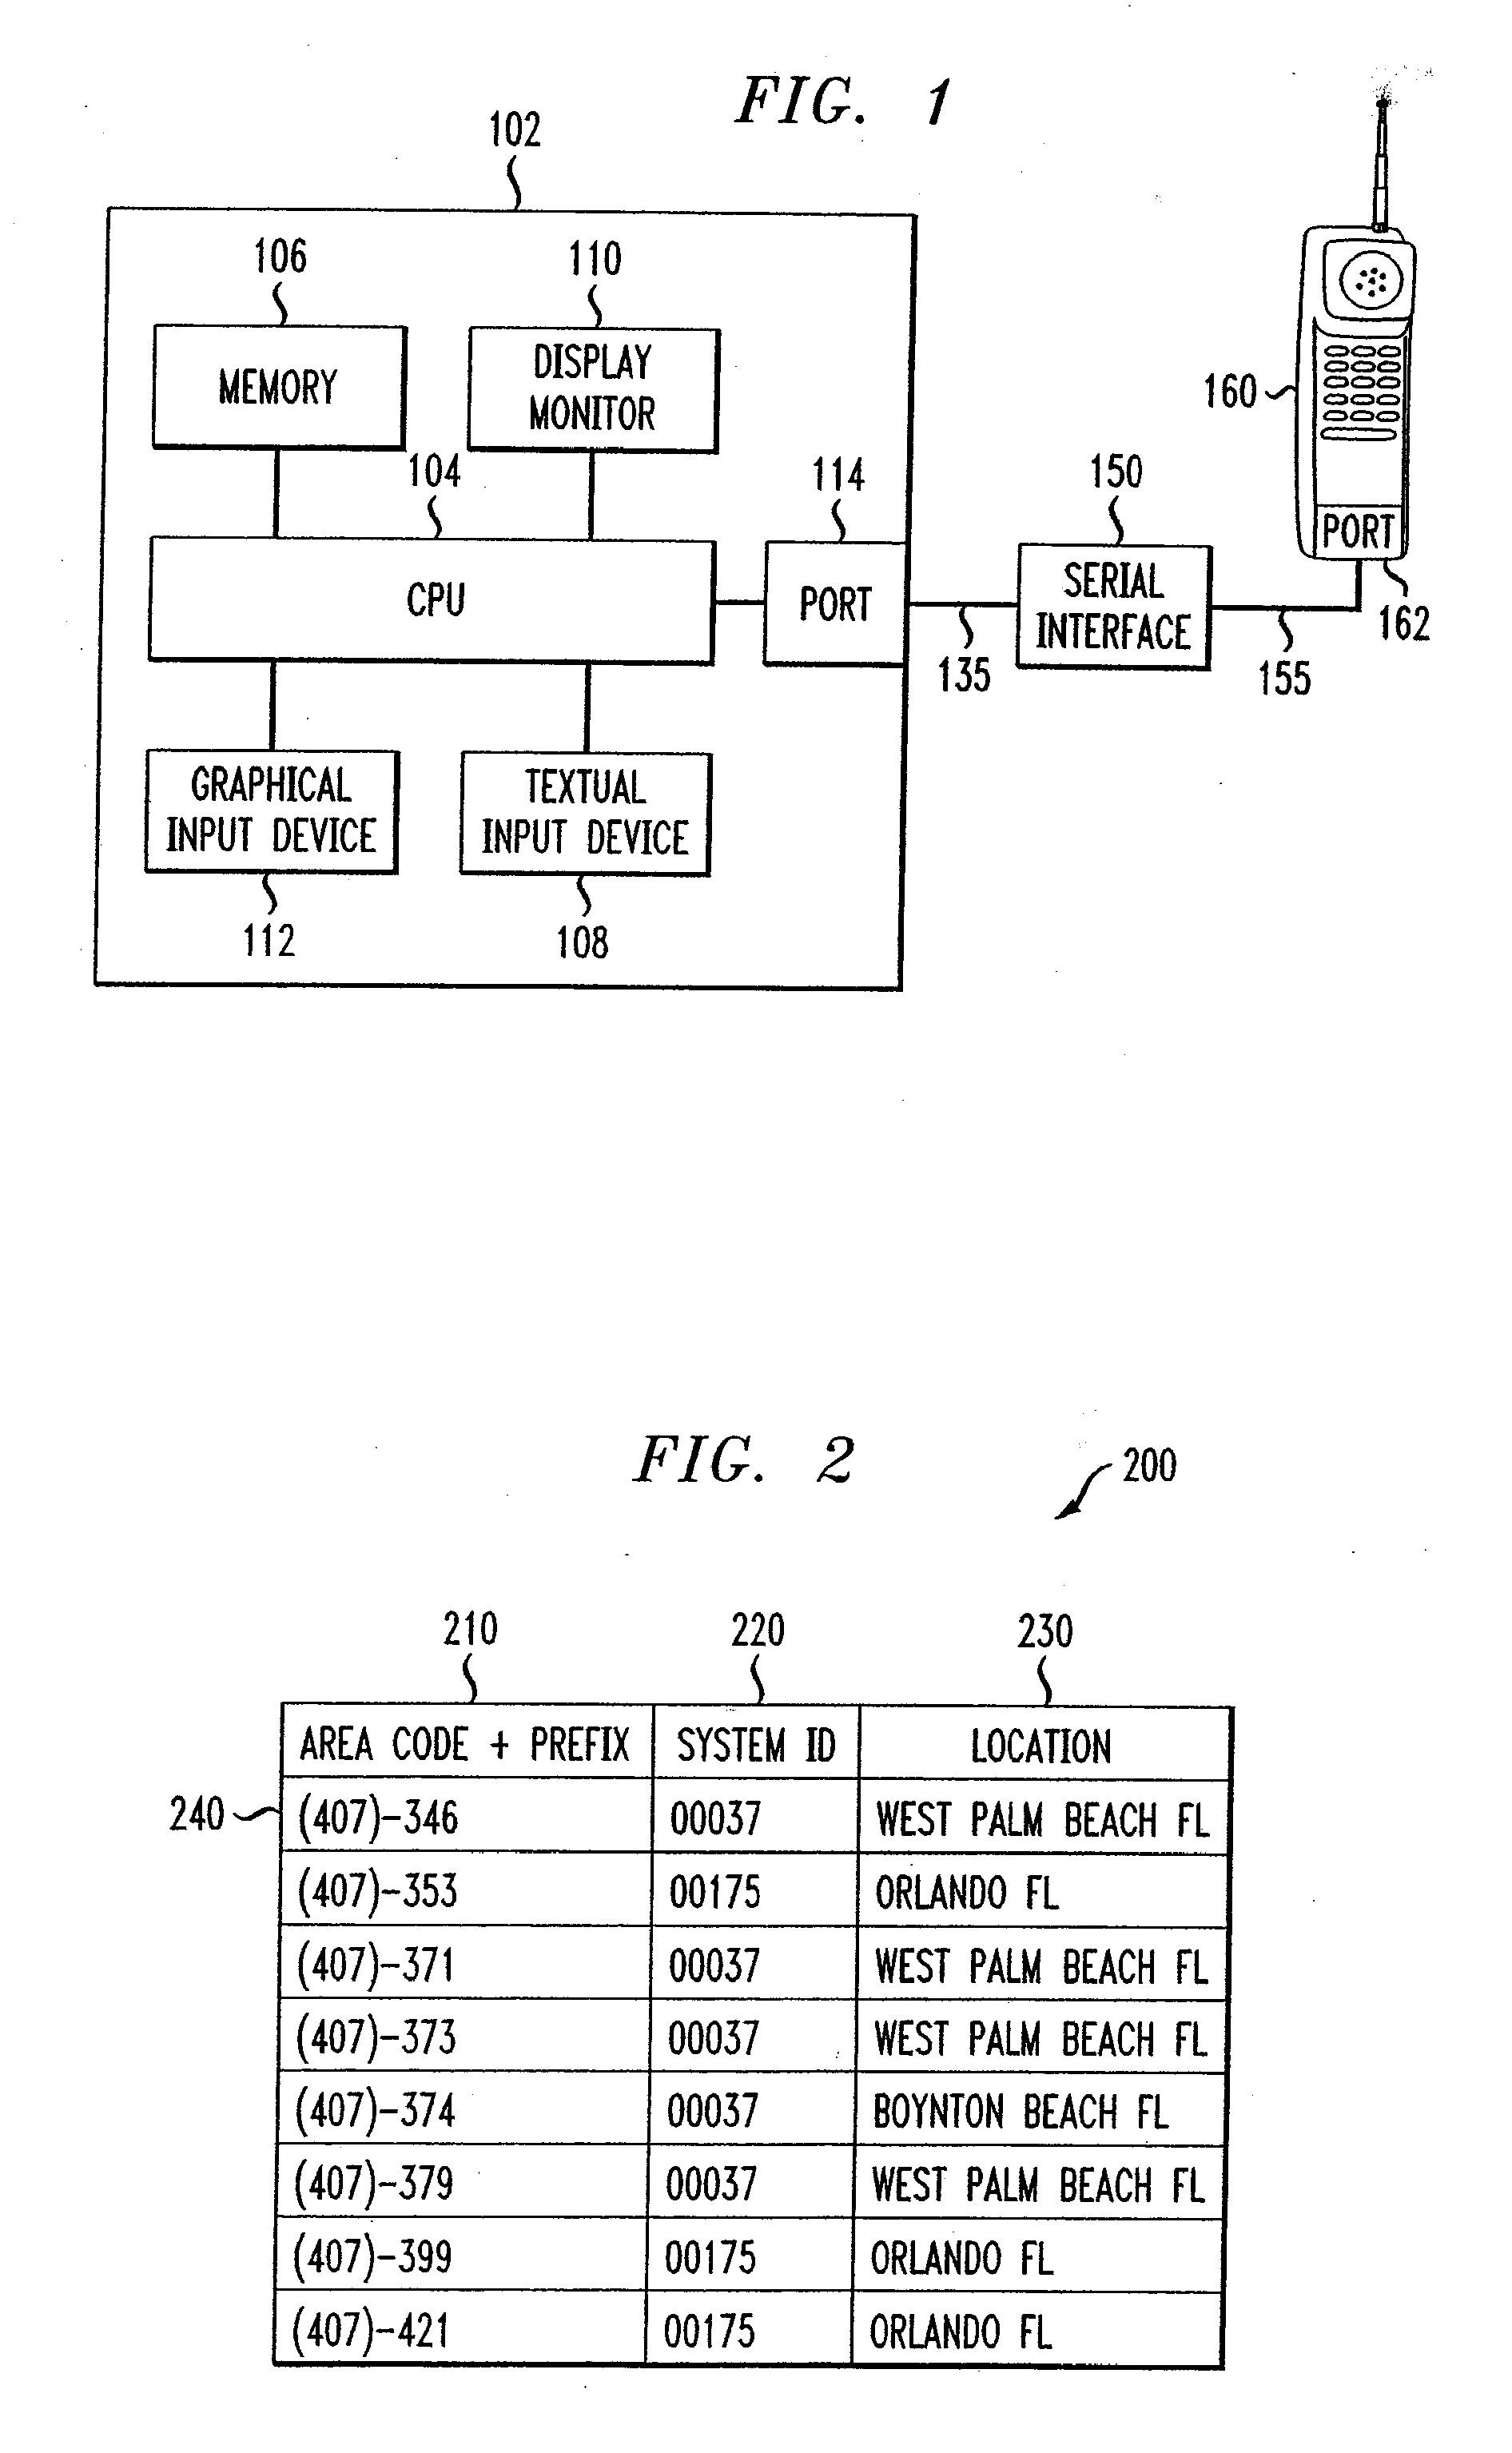 Method and apparatus for storing activation data in a cellular telephone